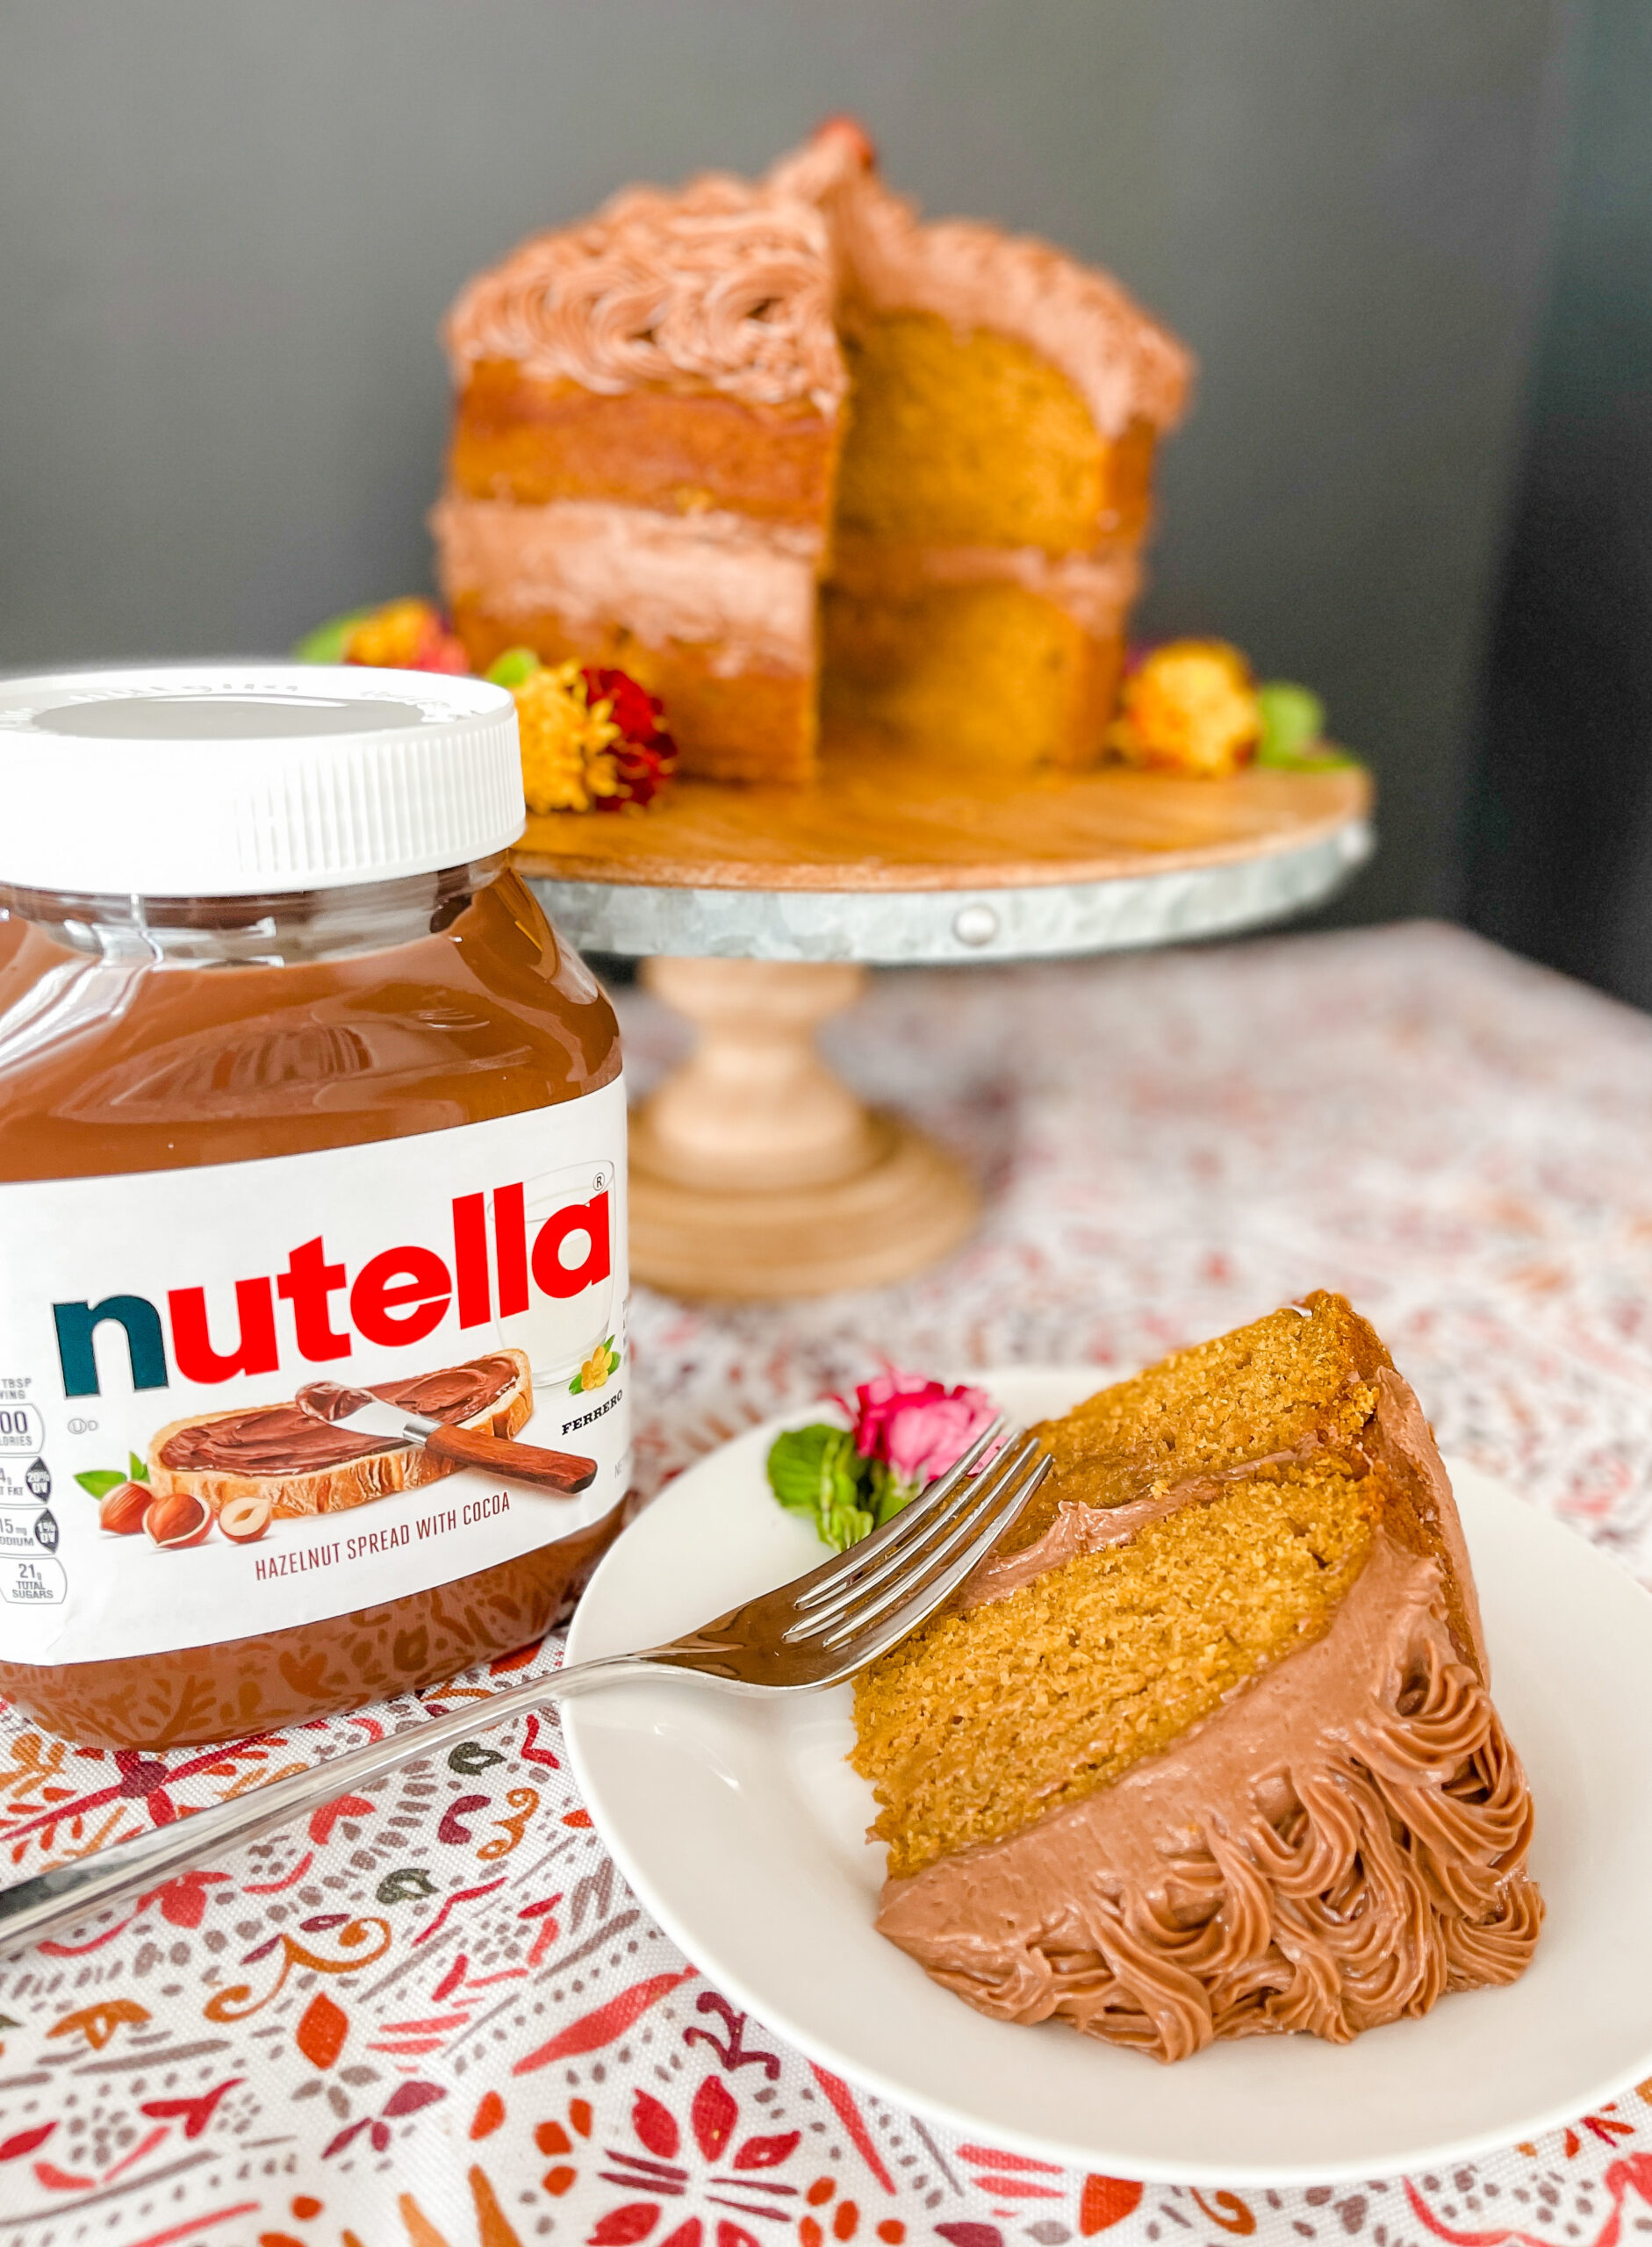 Cake slice with Nutella jar and full cake in the background.